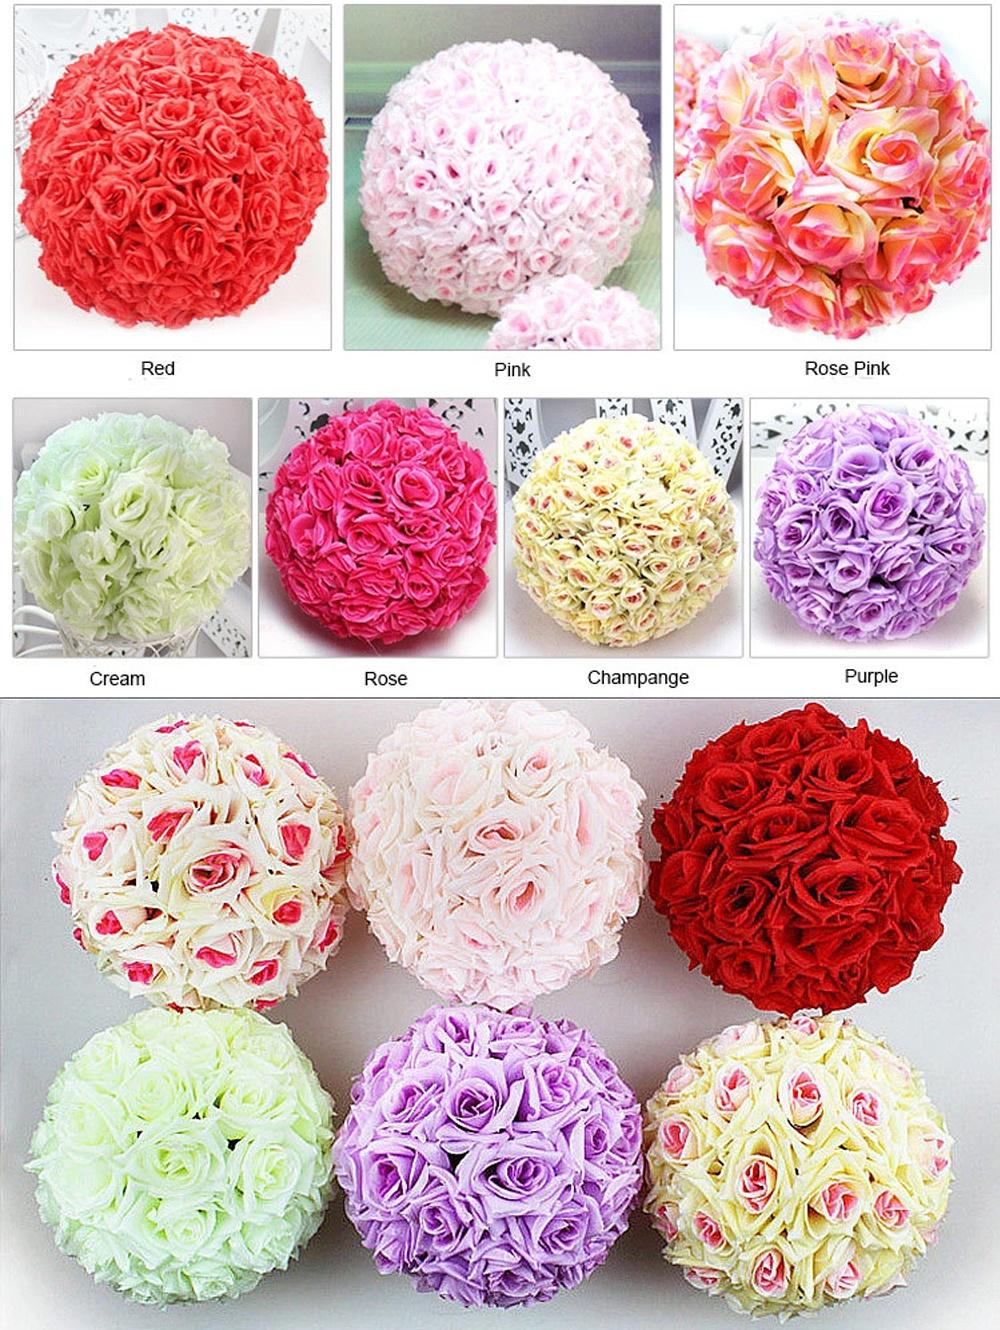 Wedding Table Centerpieces Indoor Events Decorative Artificial Rose Peony Flowers Floral Arrangements Ball